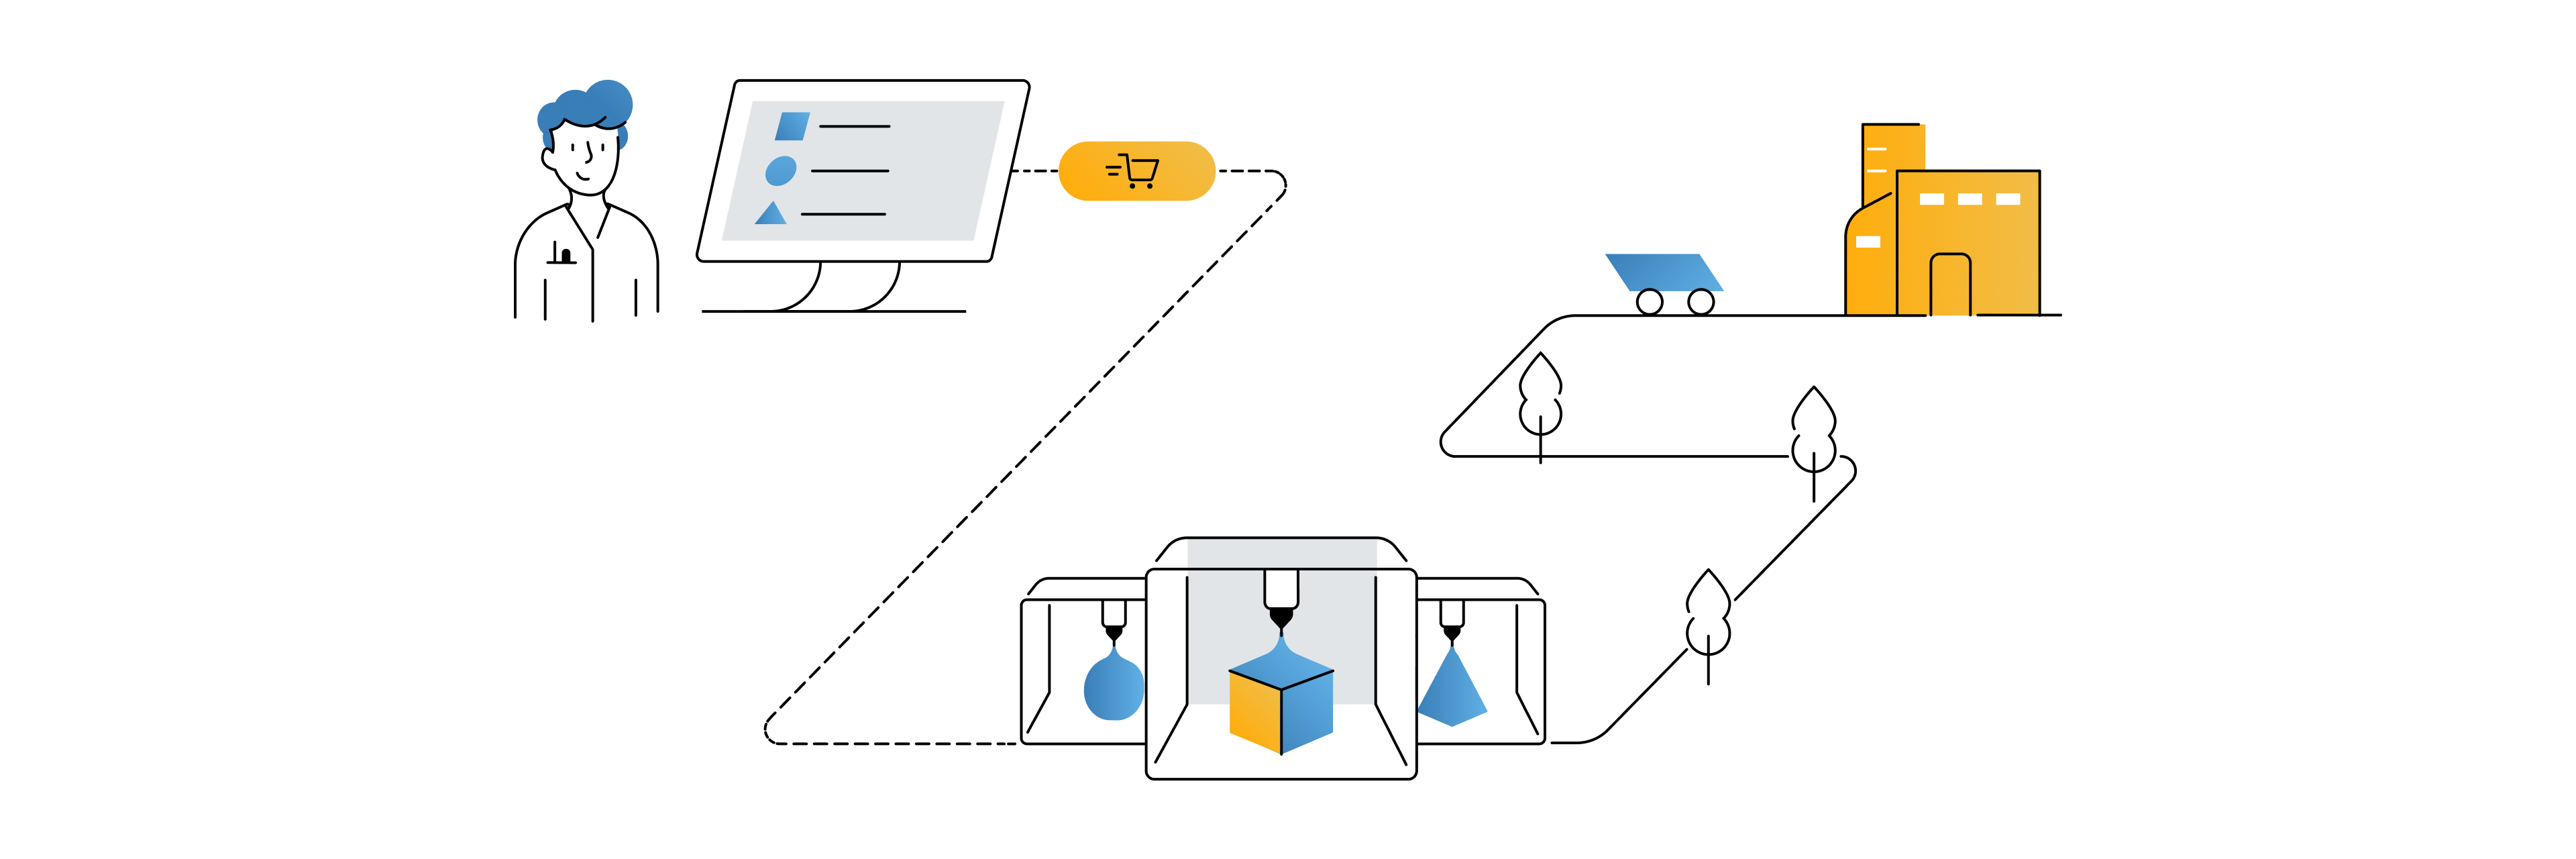 Graphic showing the workflow from online order to delivery